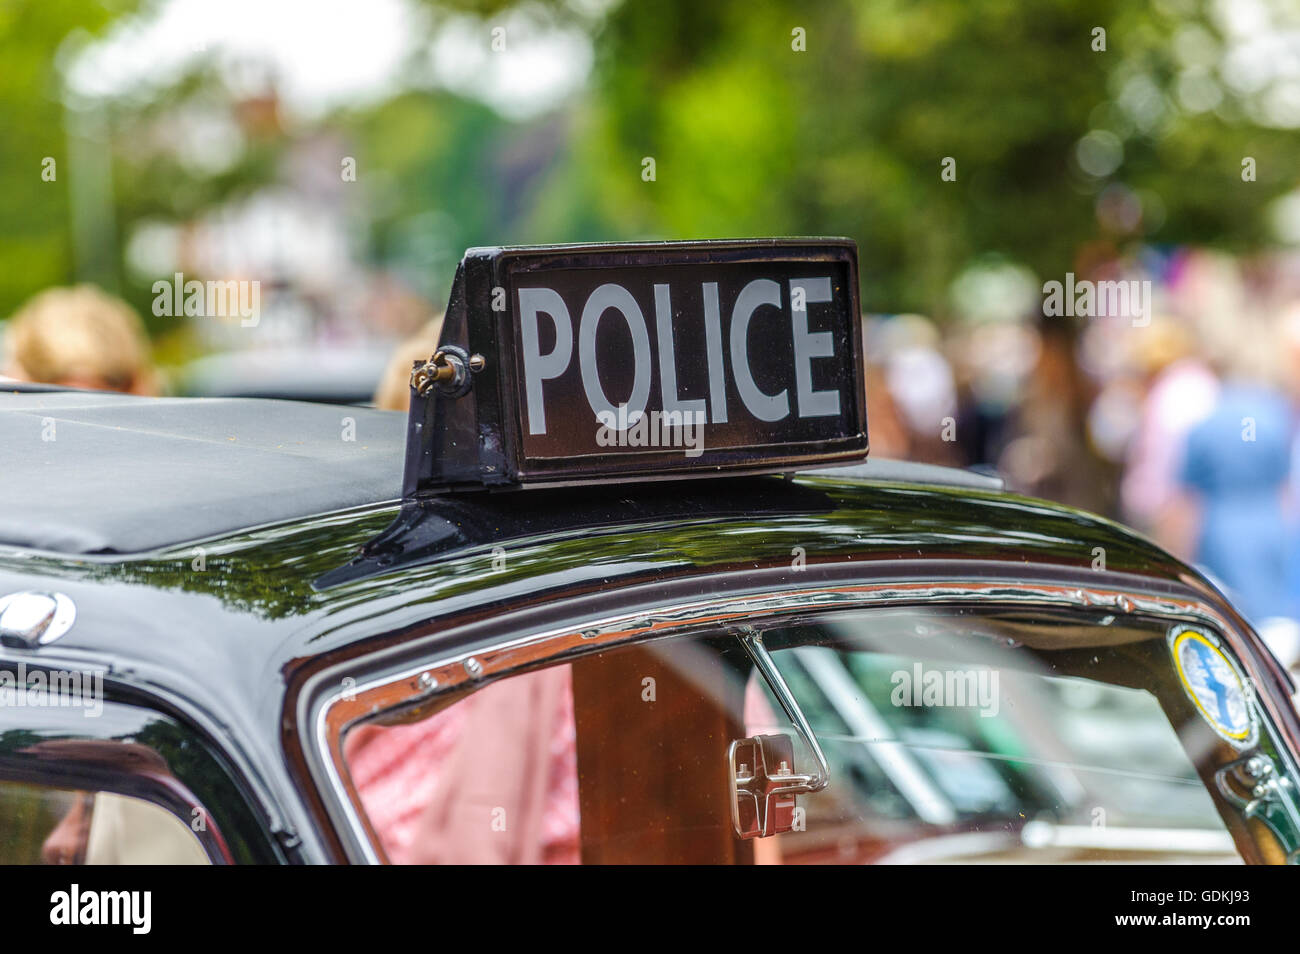 Police sign on the roof of an old black car car Stock Photo